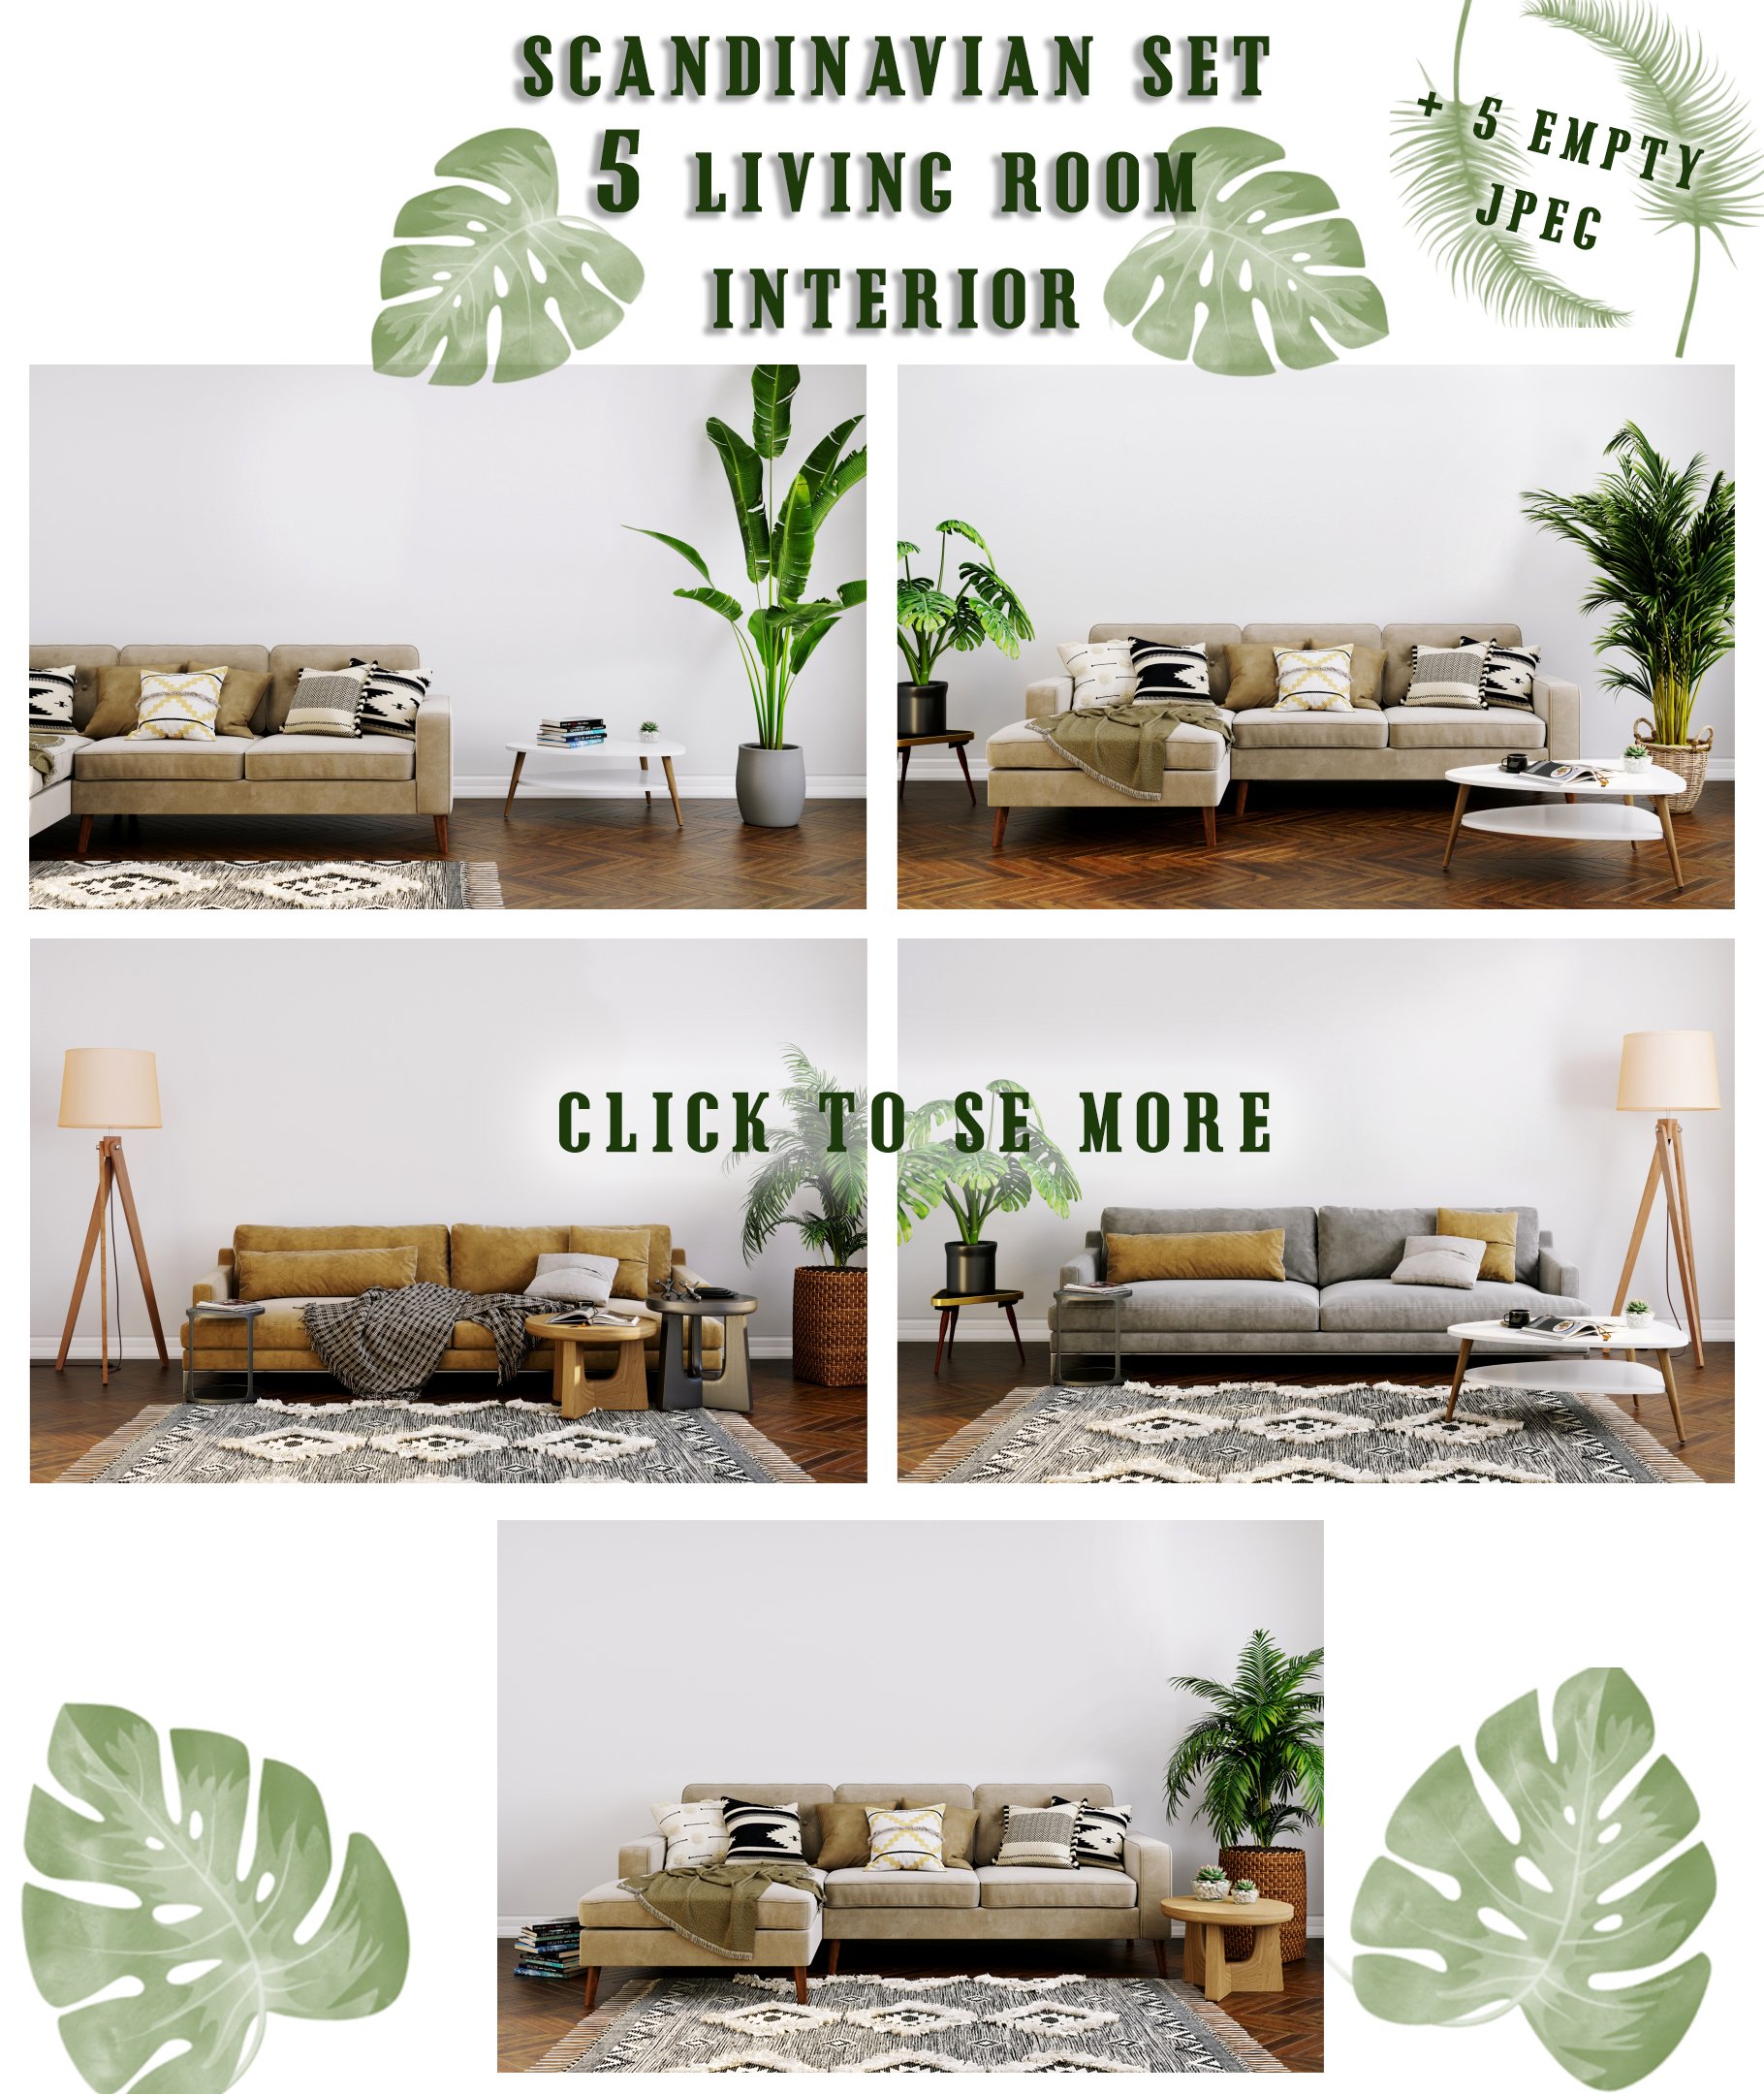 Diverse of the interior design with plants.